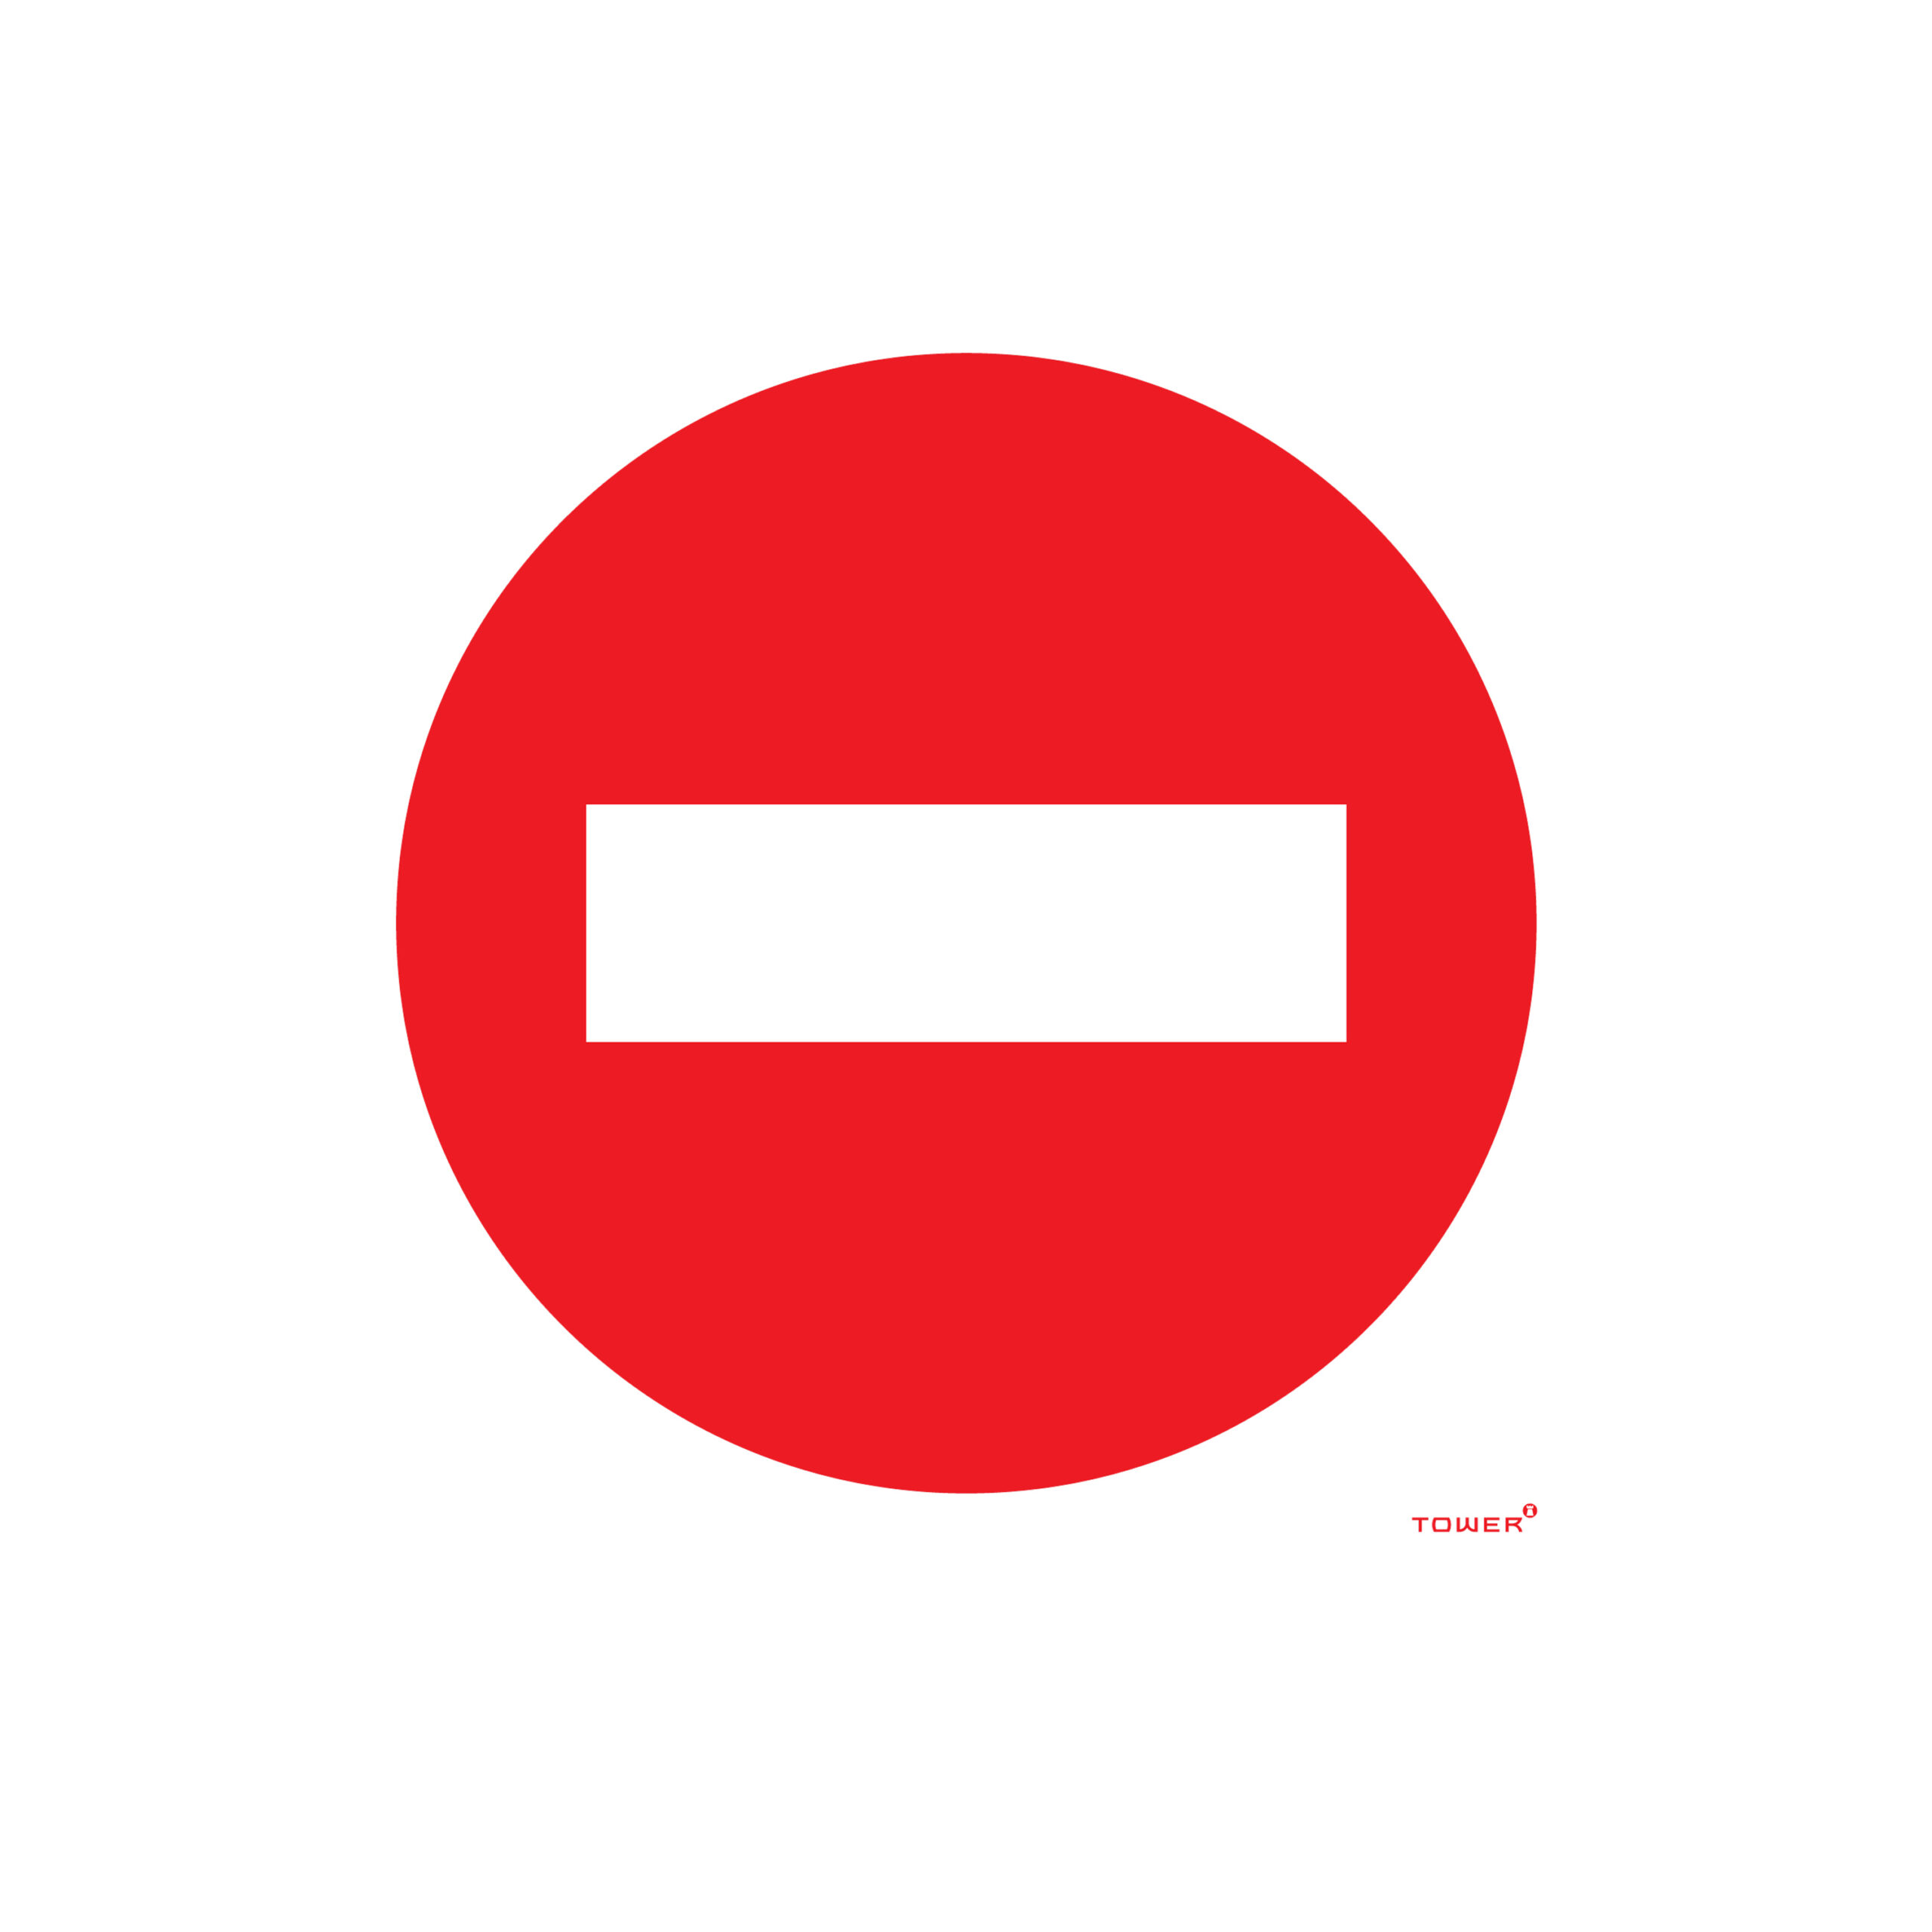 TOWER  "NO
ENTRY" SIGNAGE 
150x150mm